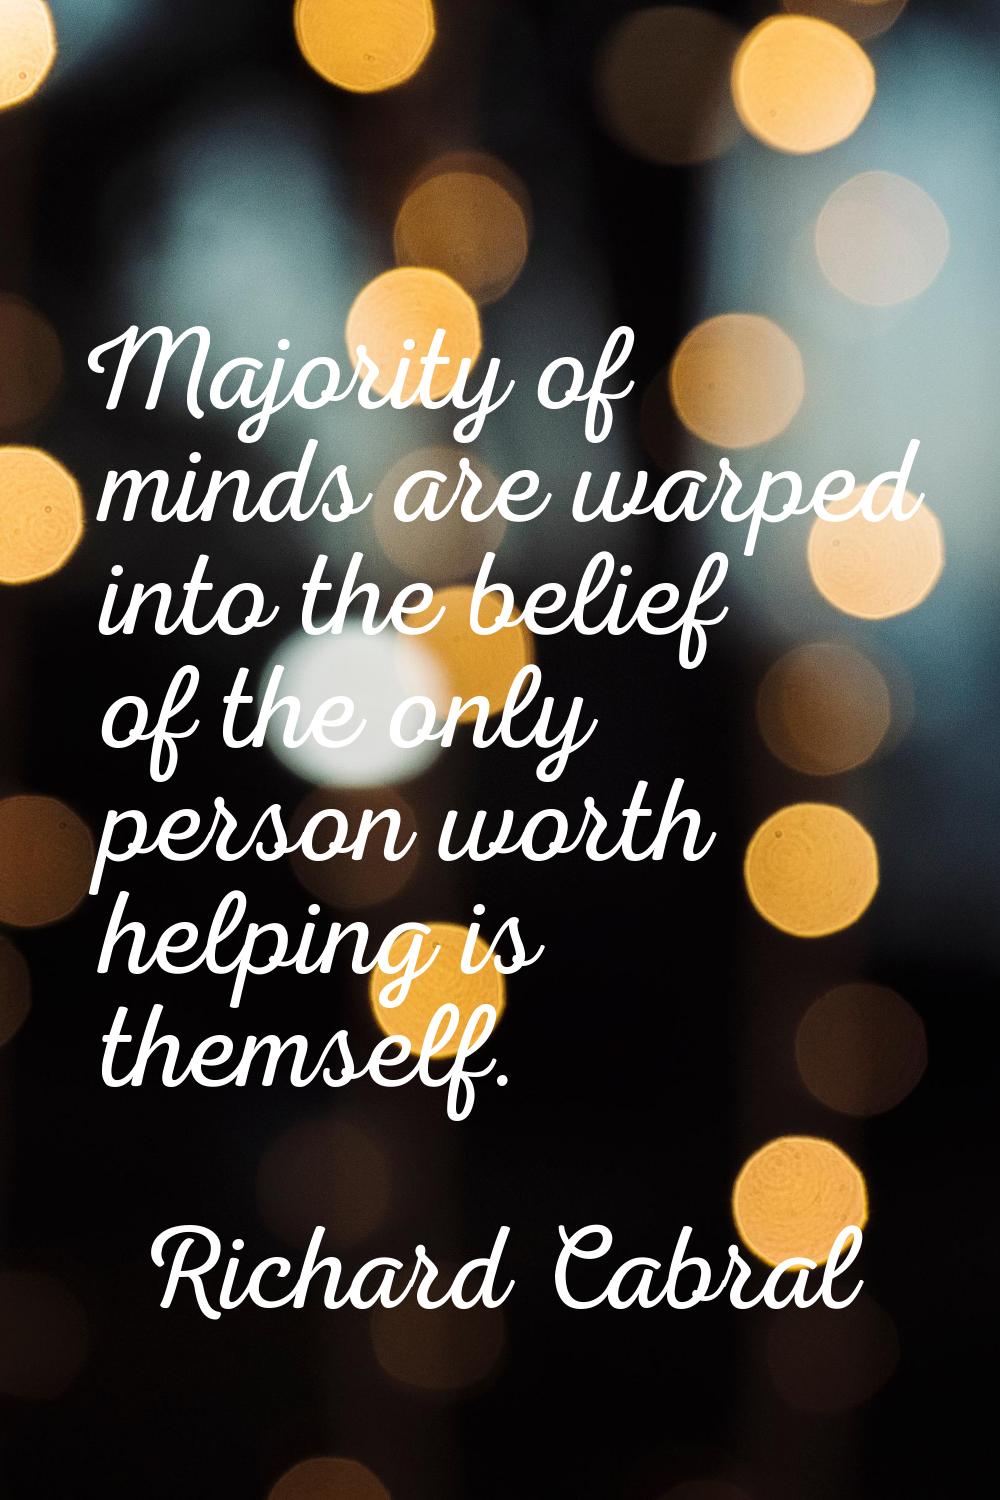 Majority of minds are warped into the belief of the only person worth helping is themself.